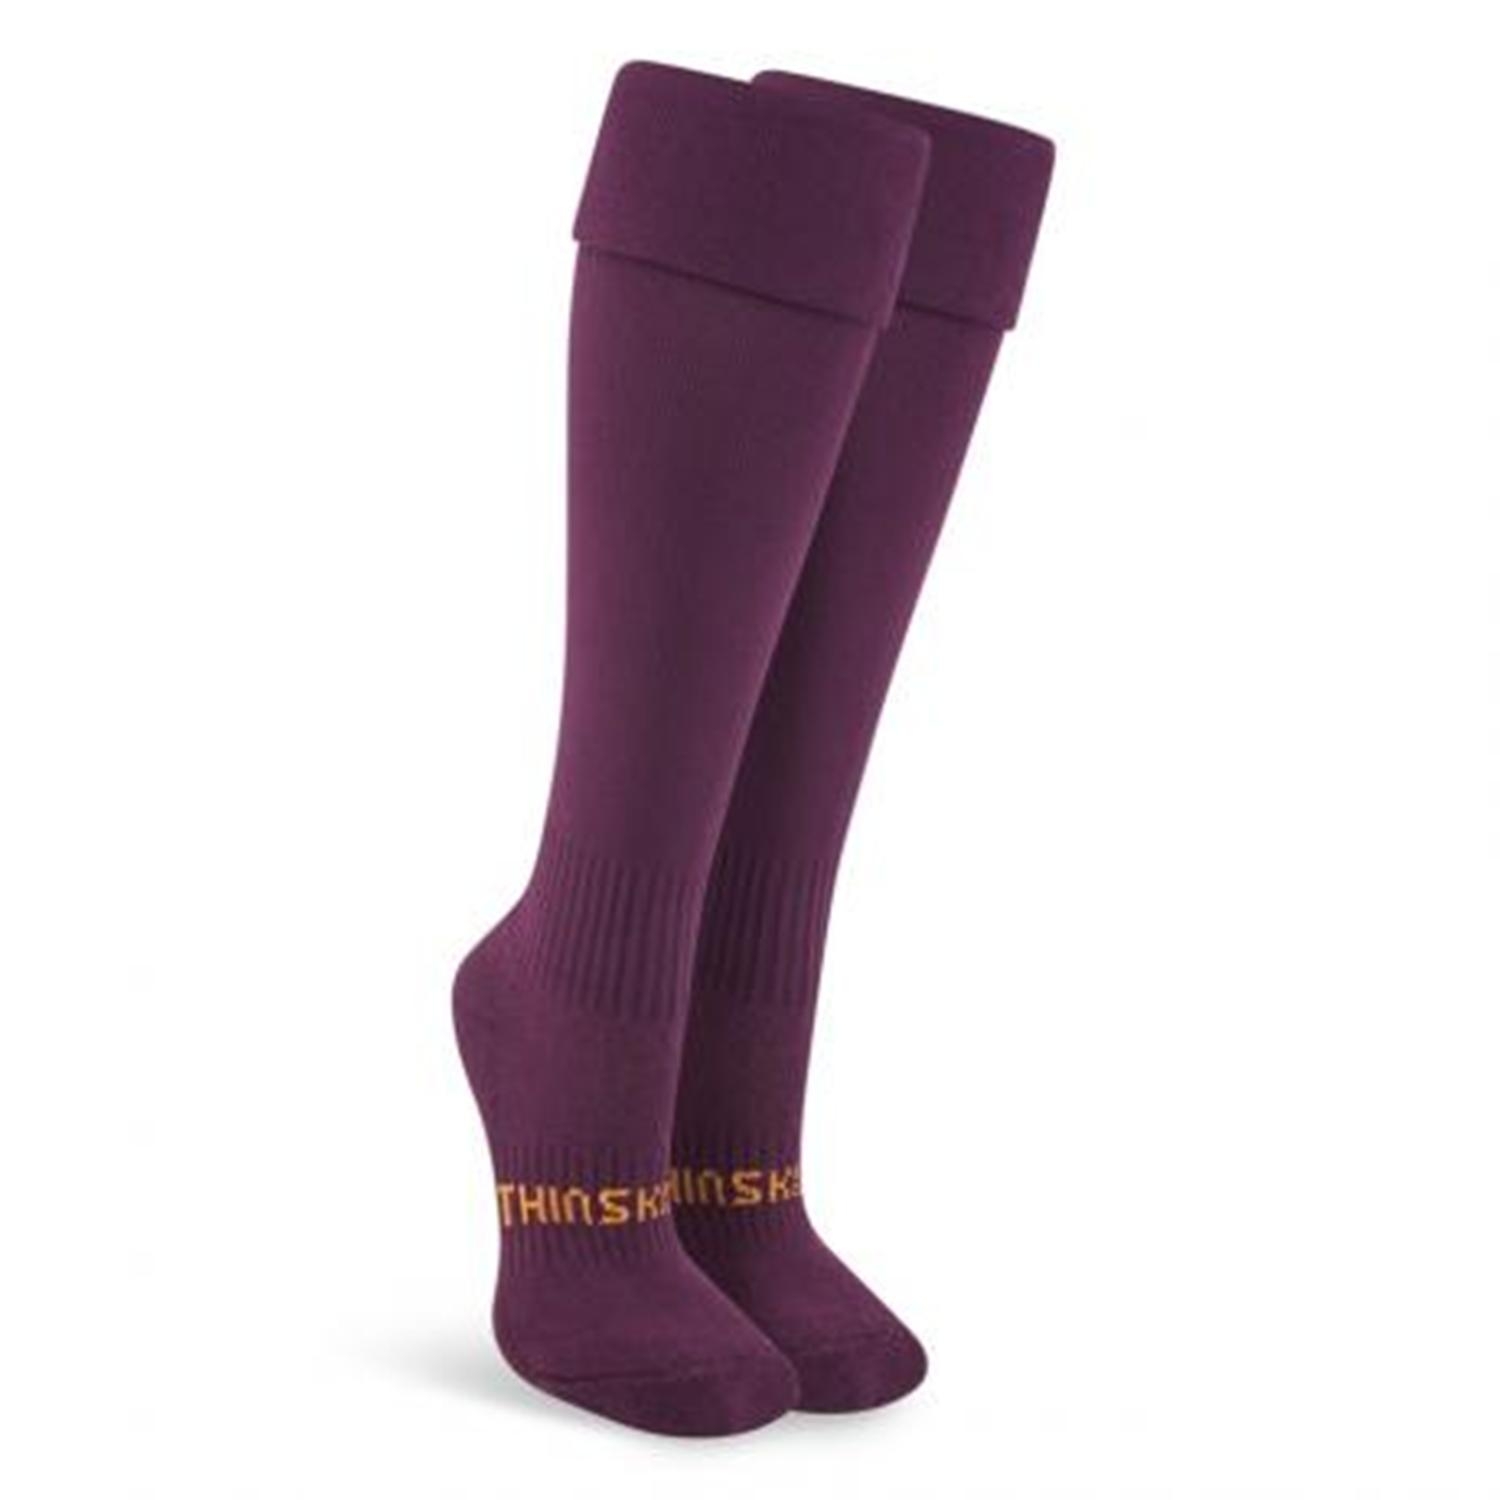 ThinSkins Technical Performance Socks: Maroon | Mike Pawley Sports